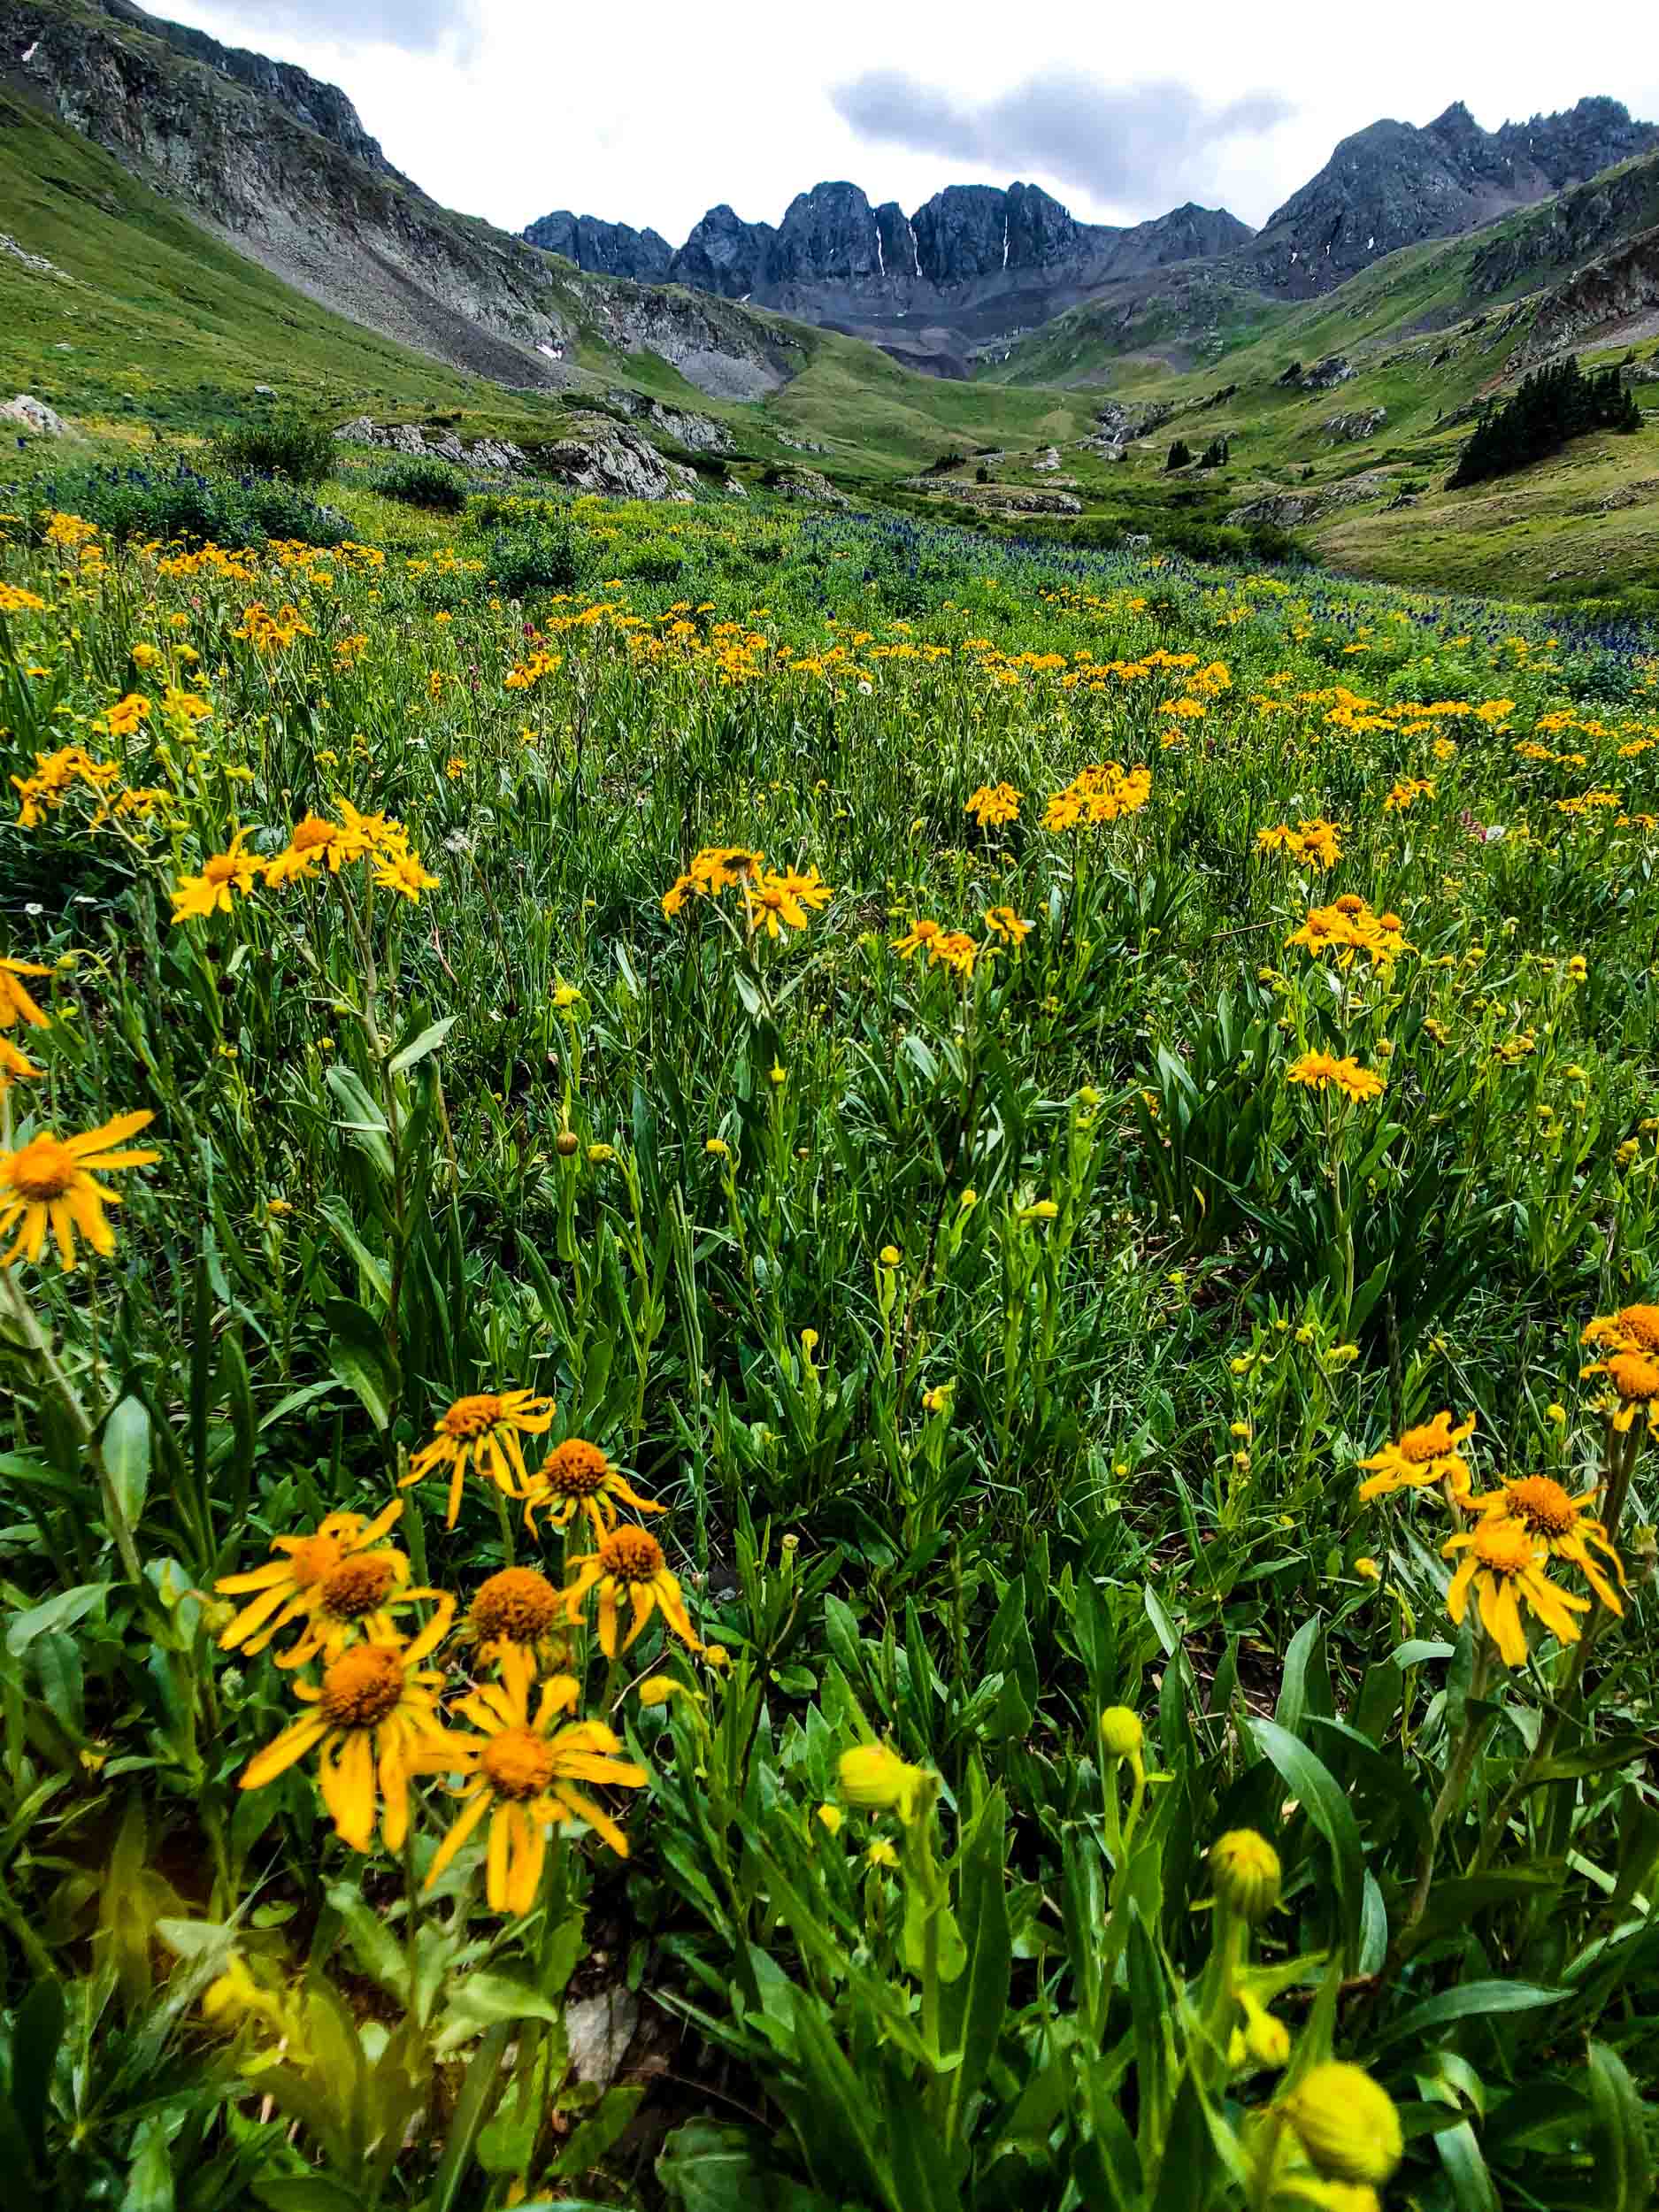  Mule Ear fill the valley of American Basin - iPhone 8 Plus, Moment Wide Lens, Snapseed 